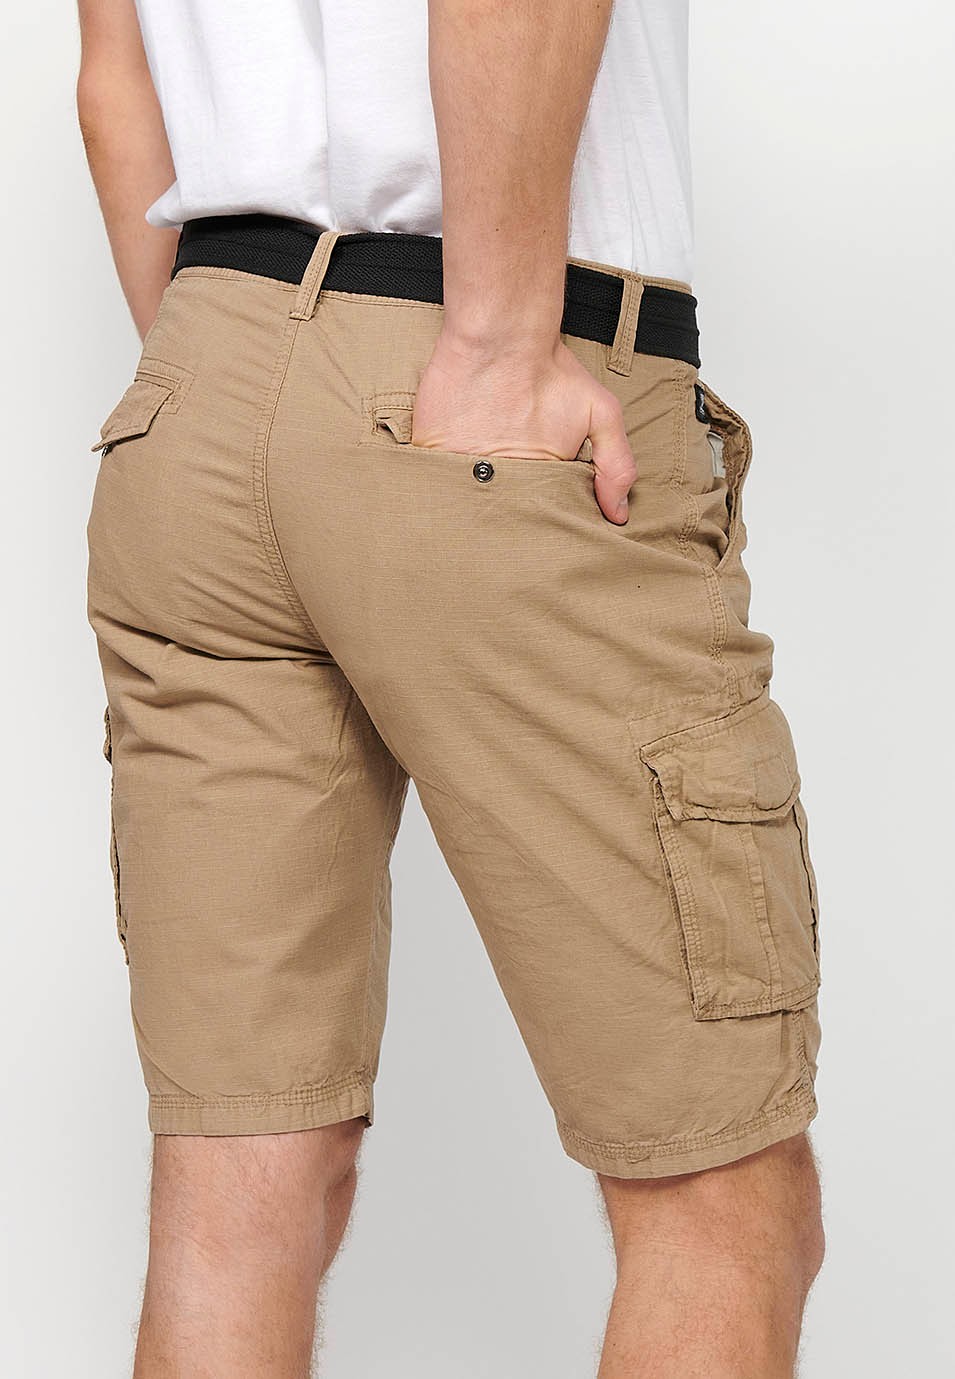 Cotton cargo shorts with belt and front closure with zipper and button with pockets, two back pockets with flap and two cargo pants in Beige Color for Men 5